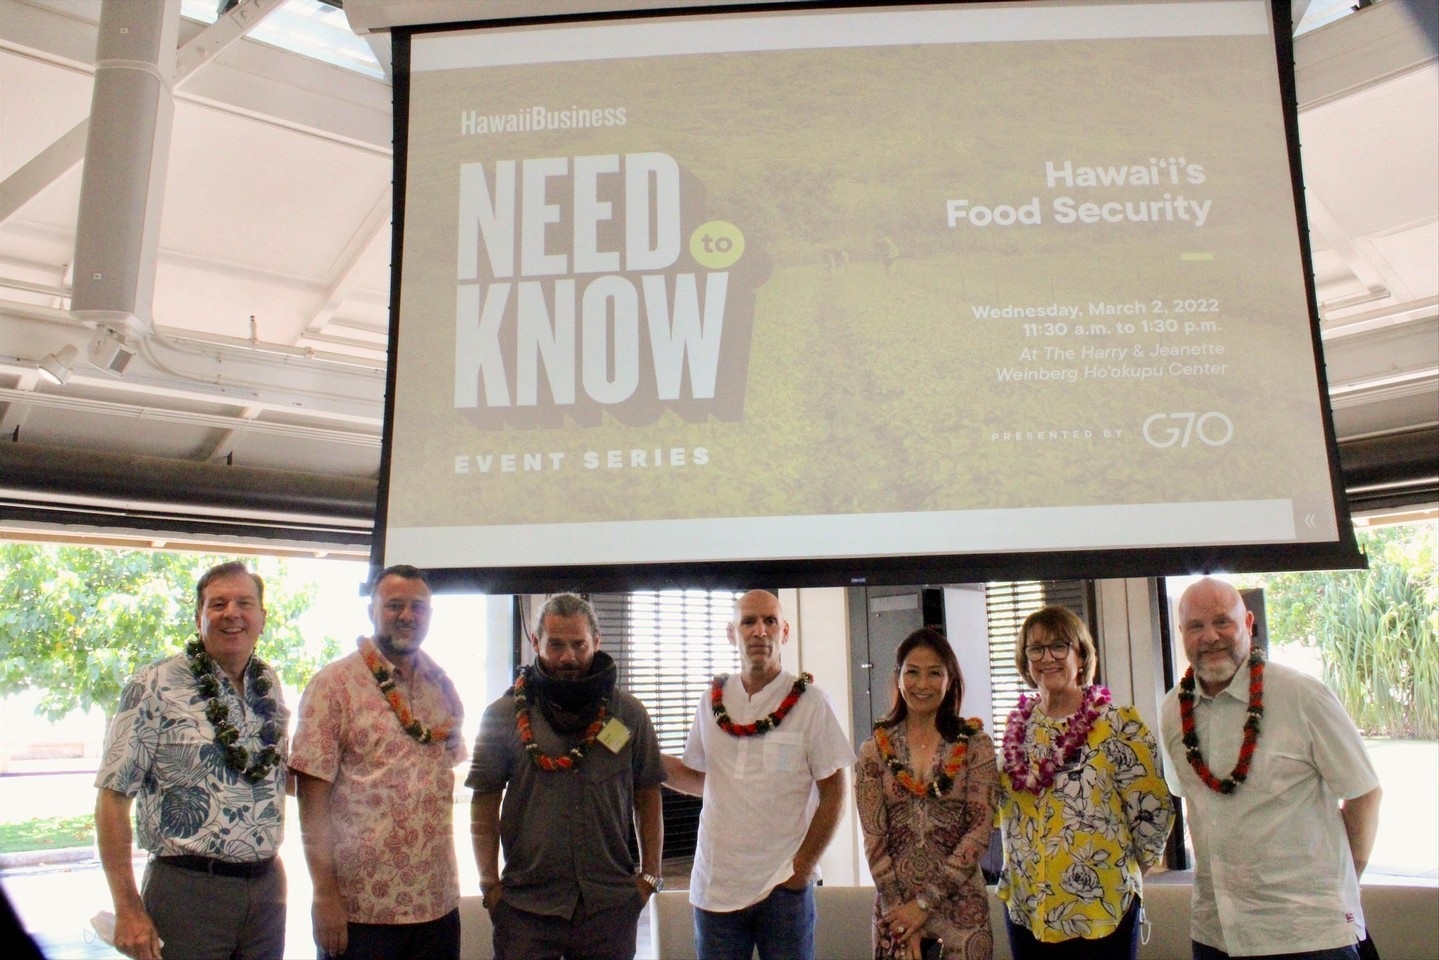 Chad Buck is as panelist on Food Security and Hawaiʻi’s Supply Chain